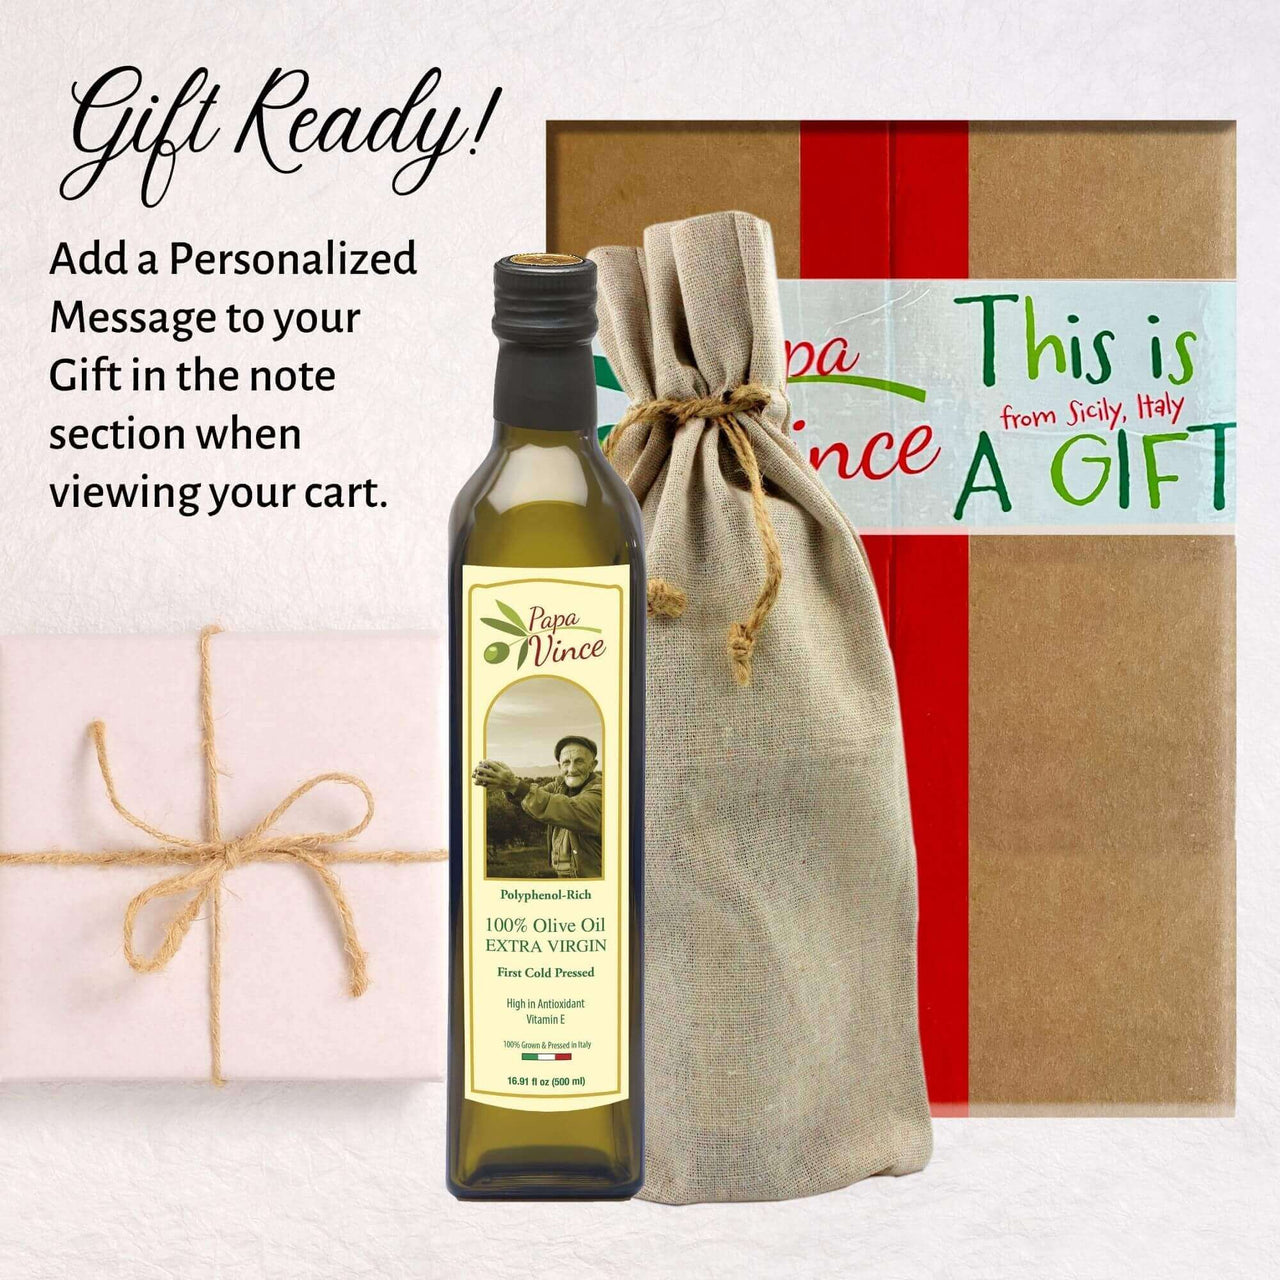 Papa Vince Olive Oil Extra Virgin Gift - Unblended, Family Harvest 2022/23, High in Polyphenols, Single Estate, First Cold Pressed, Sicily, Italy, Peppery Finish, Unfiltered, Unrefined, Natural Burlap Bag - Papa Vince